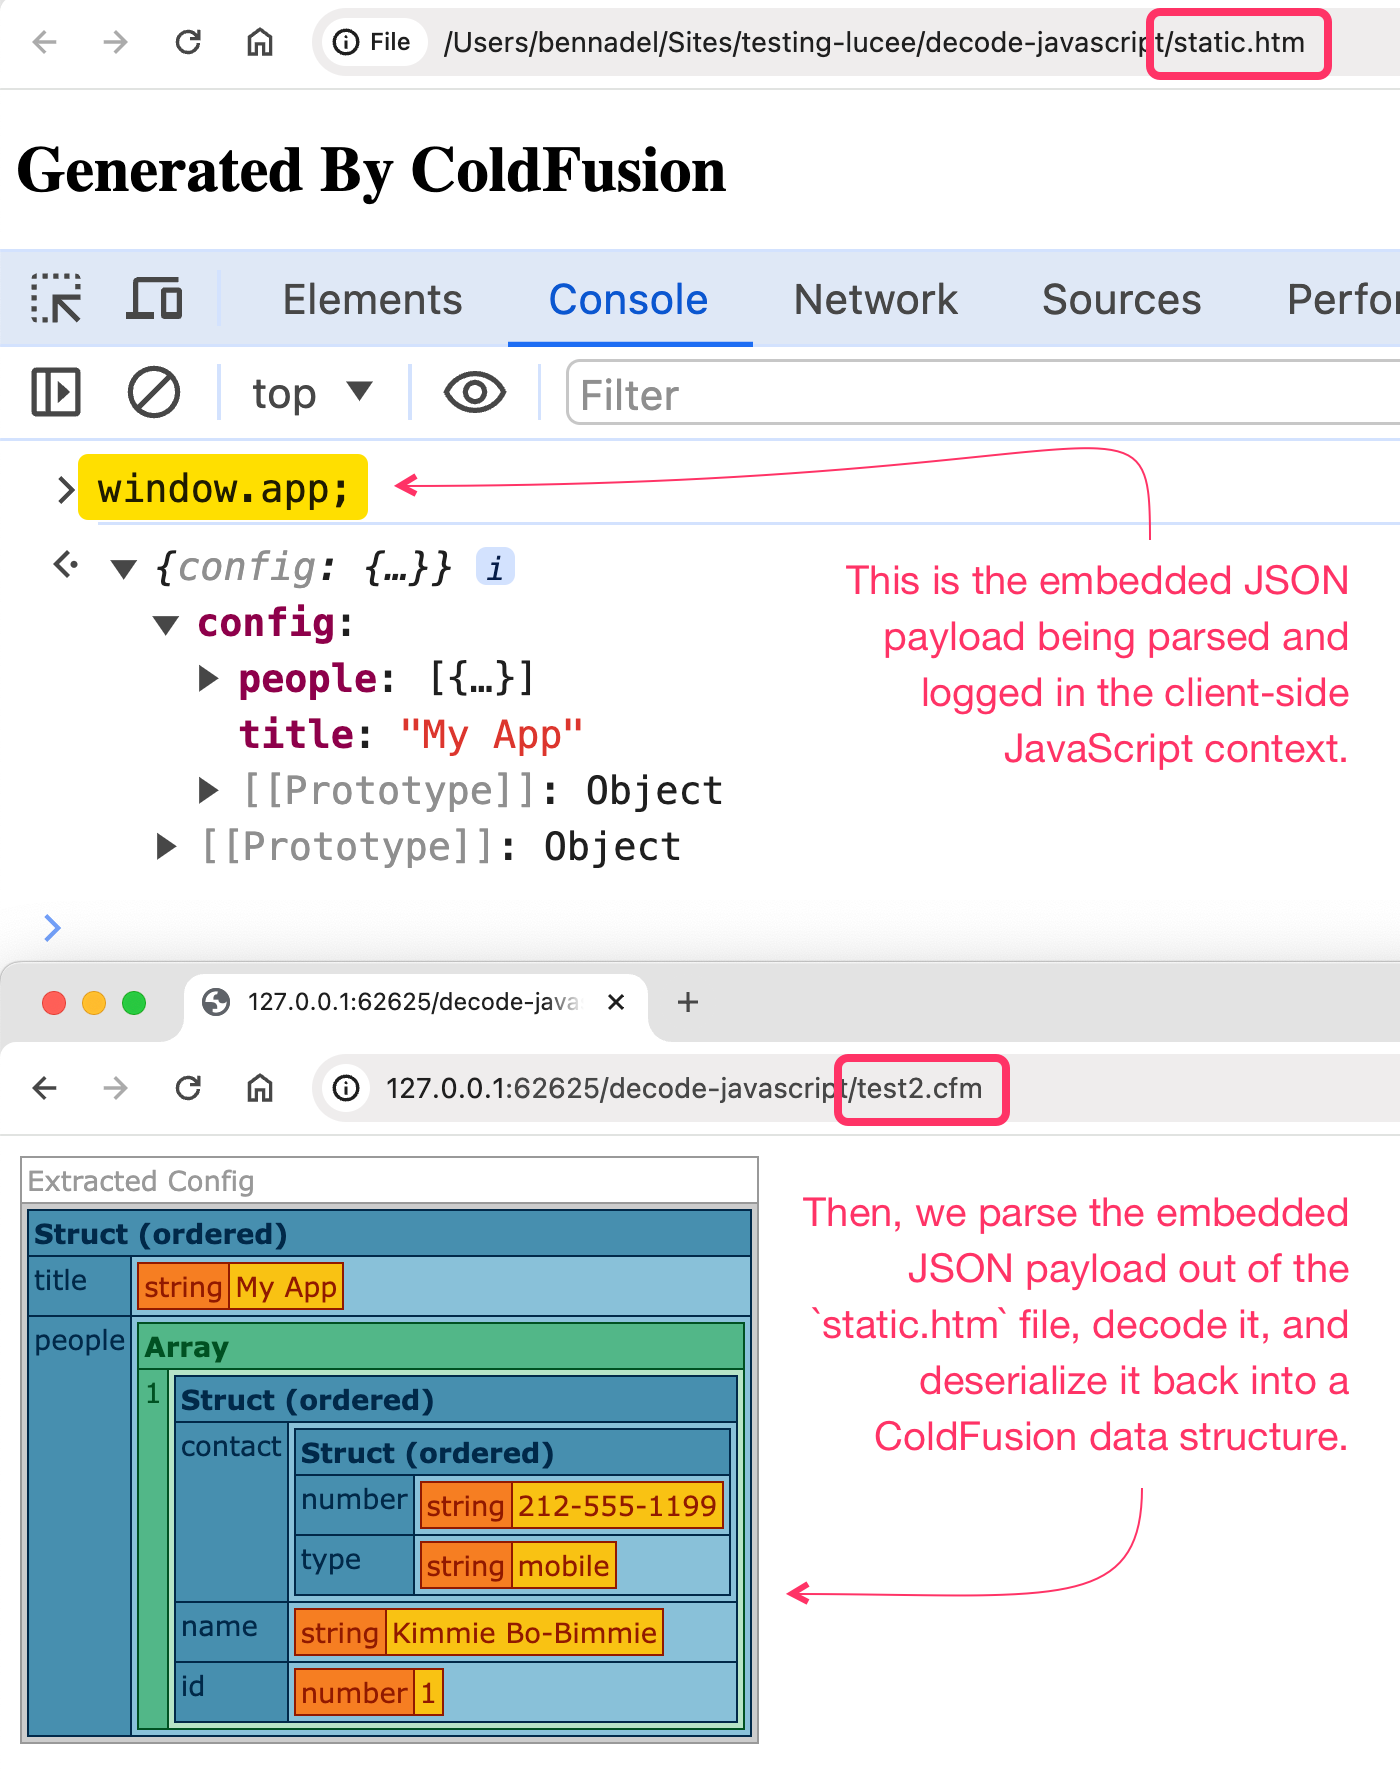 The JSON payload being parsed in both a JavaScript context and an extracted ColdFusion context.